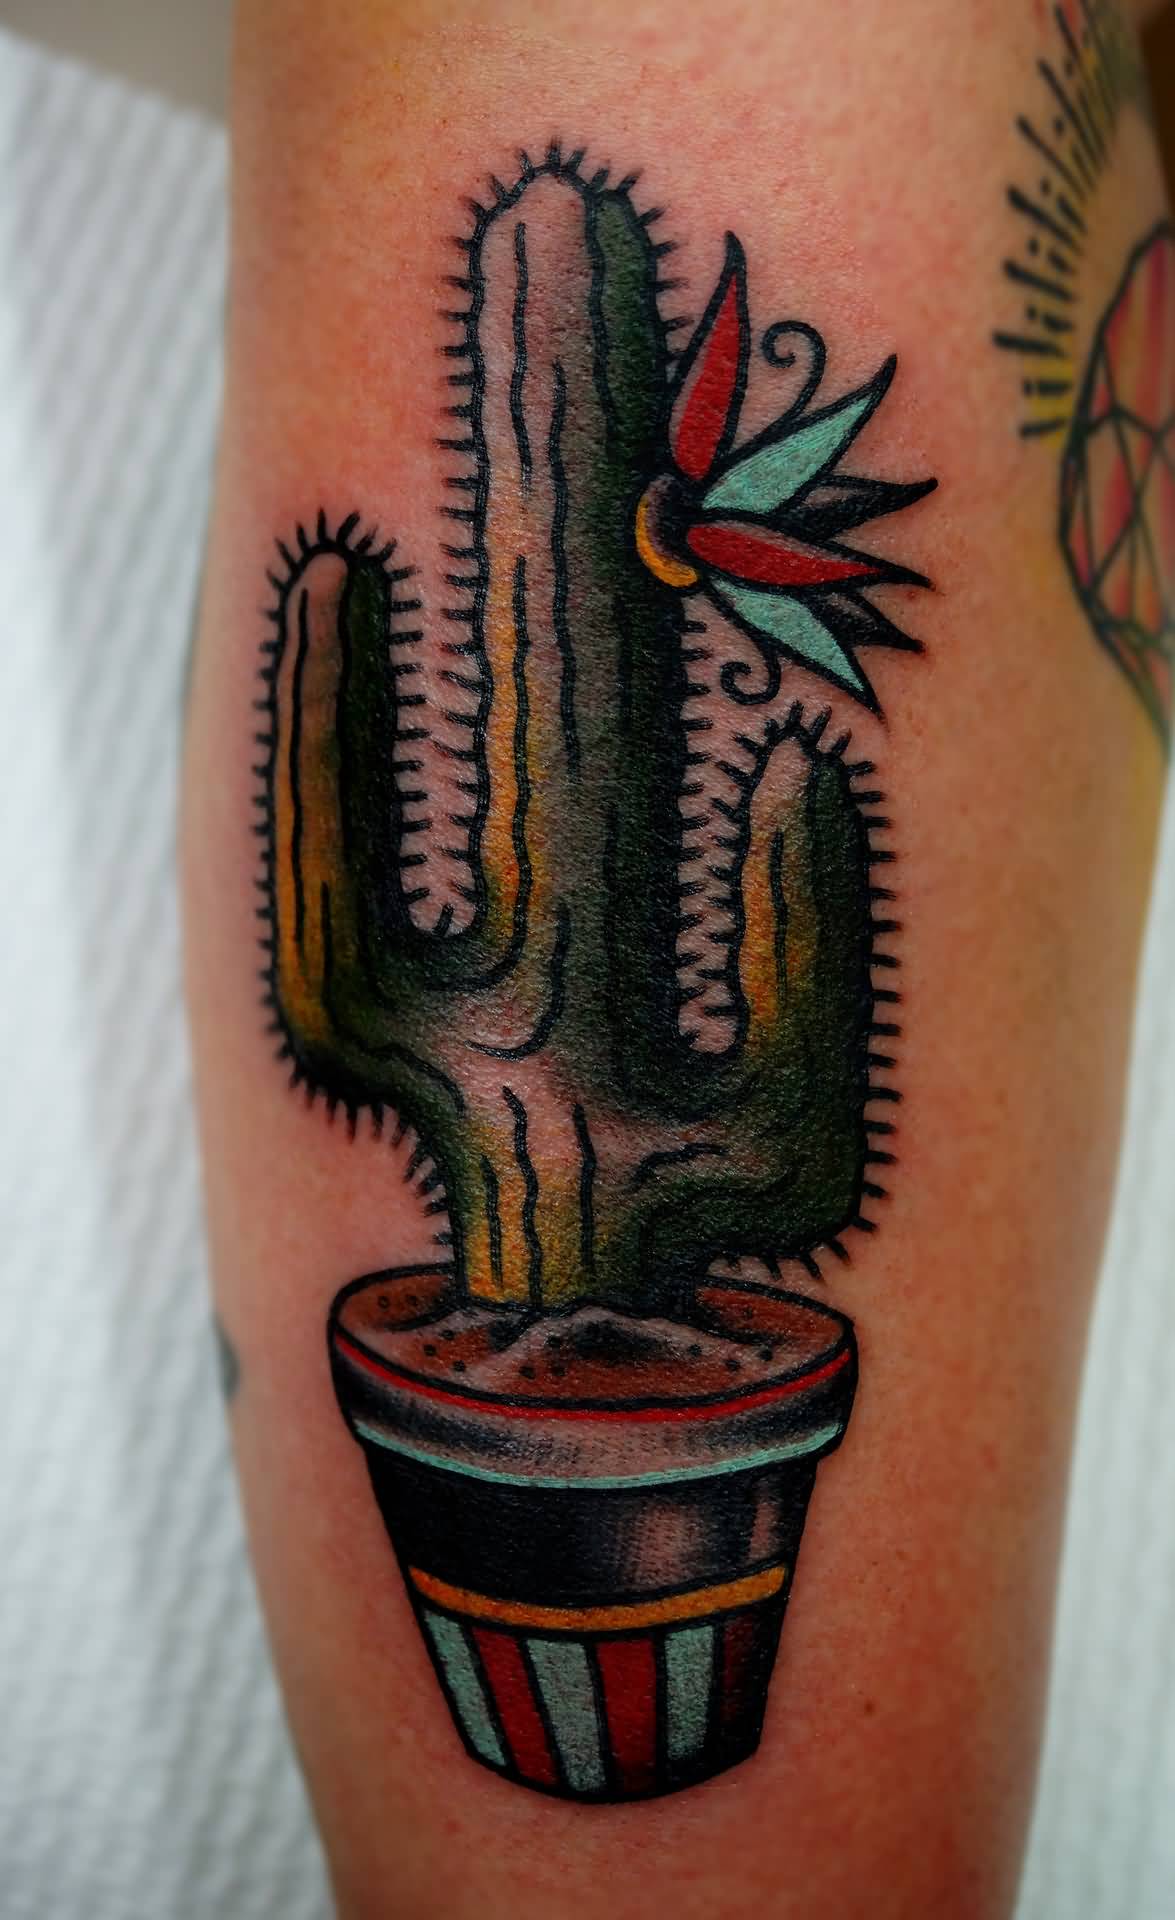 Impressive Cactus With Red And Blue Flower Traditional Tattoo.